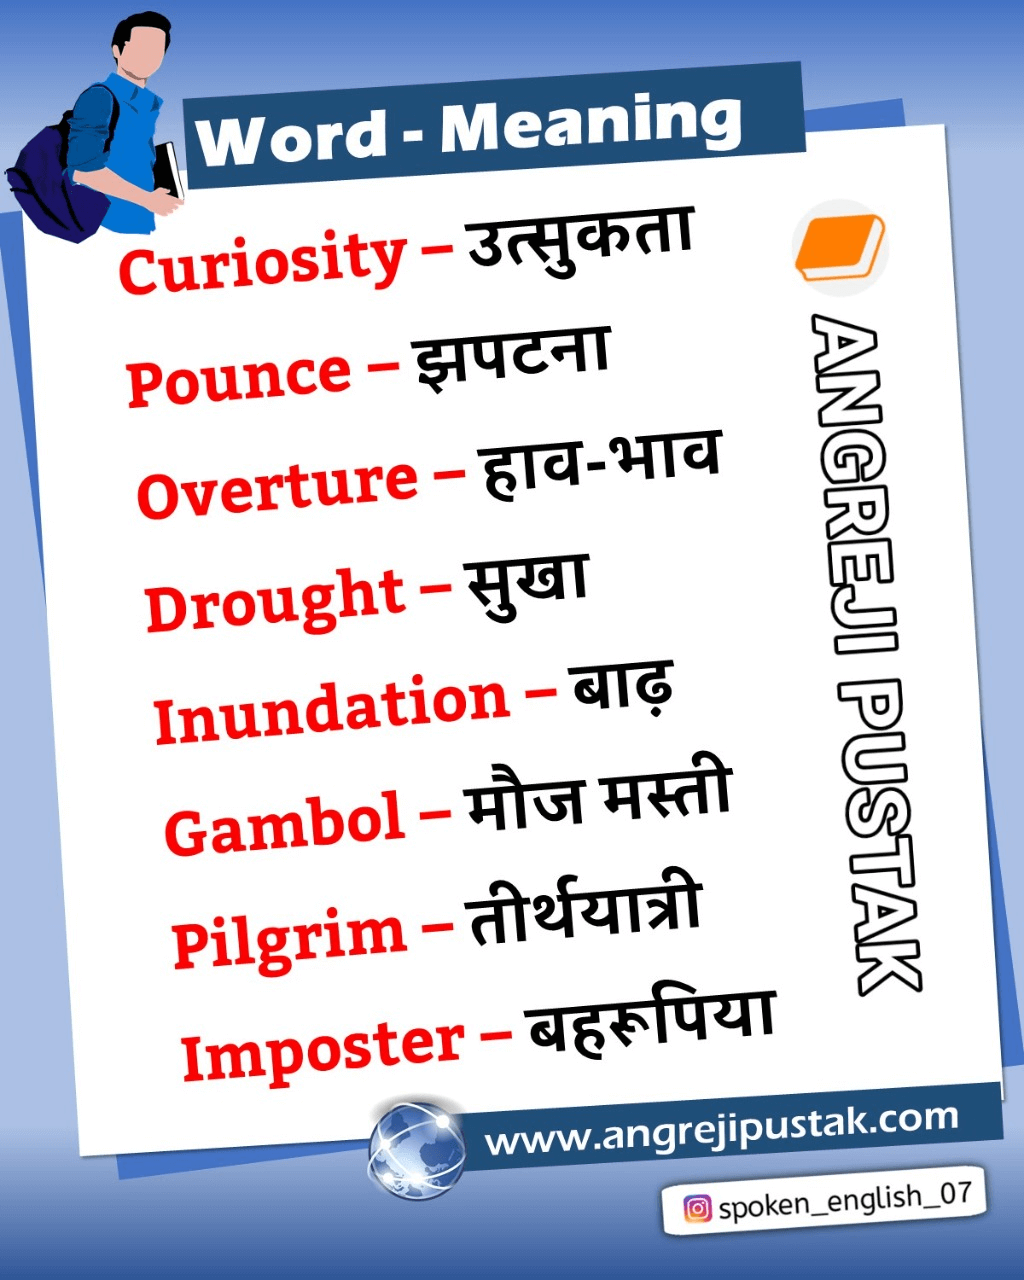 50-word-meaning-english-to-hindi-difficult-words-in-hindi-and-english